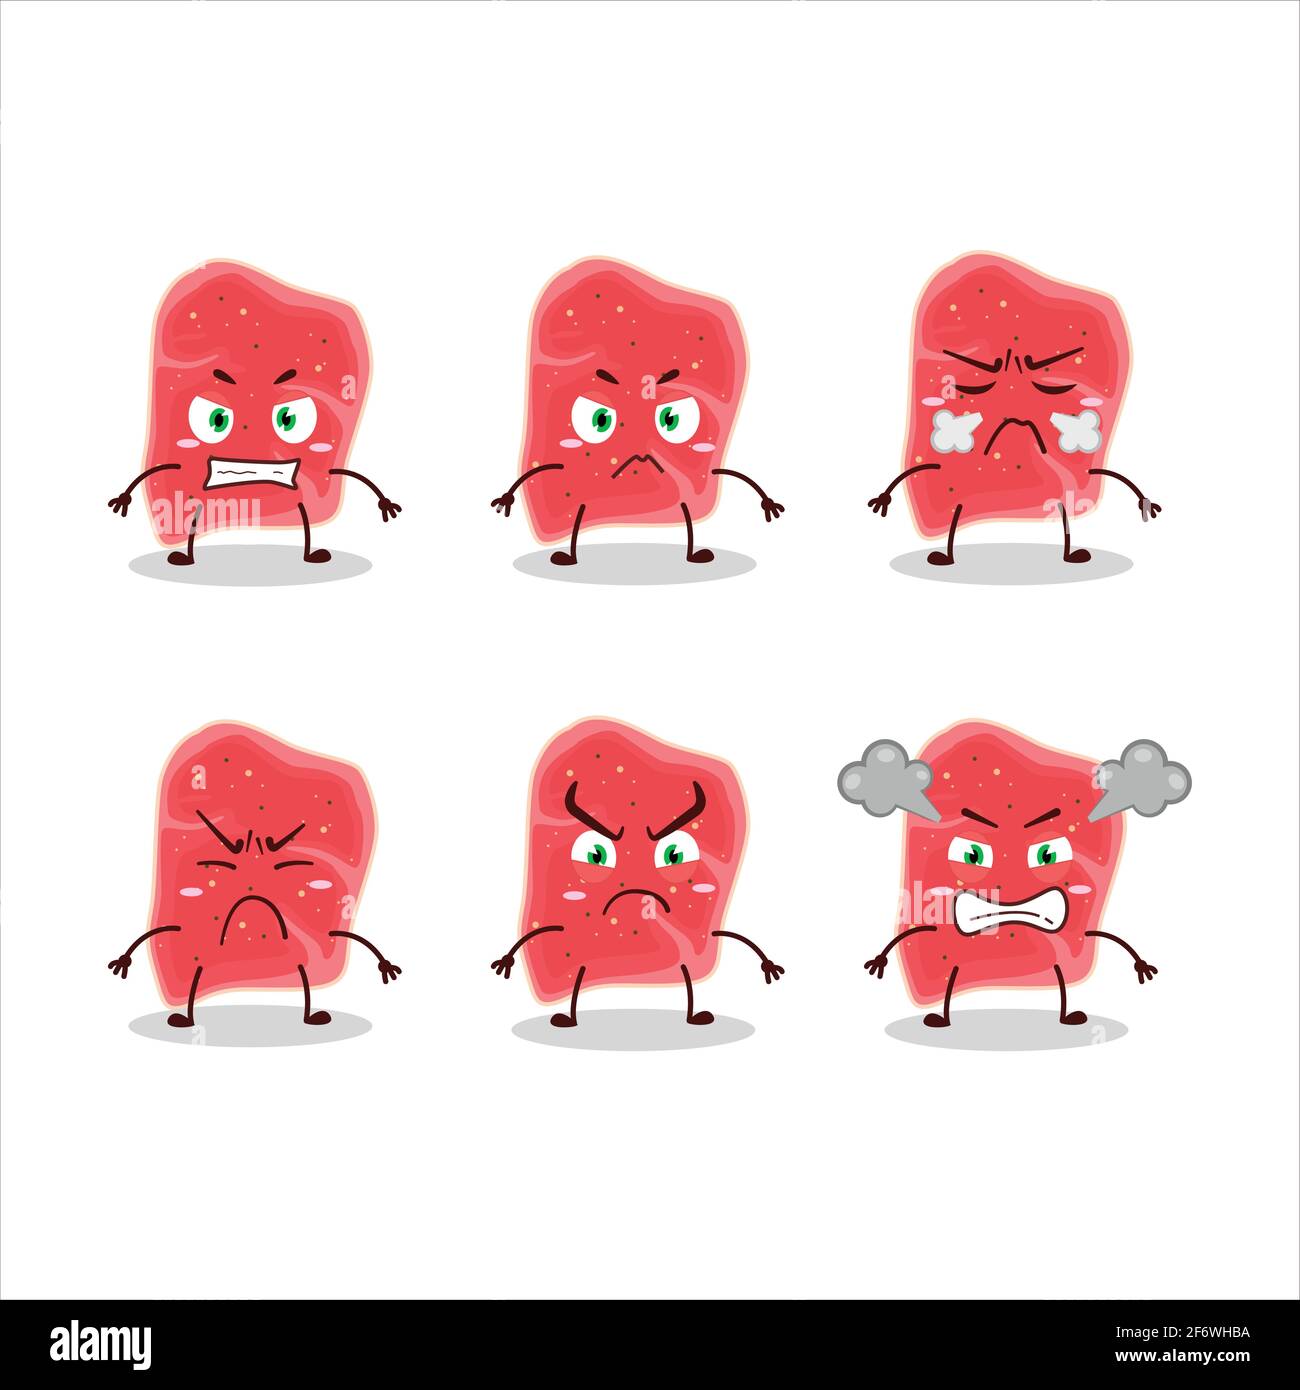 Sirloin cartoon character with various angry expressions. Vector illustration Stock Vector